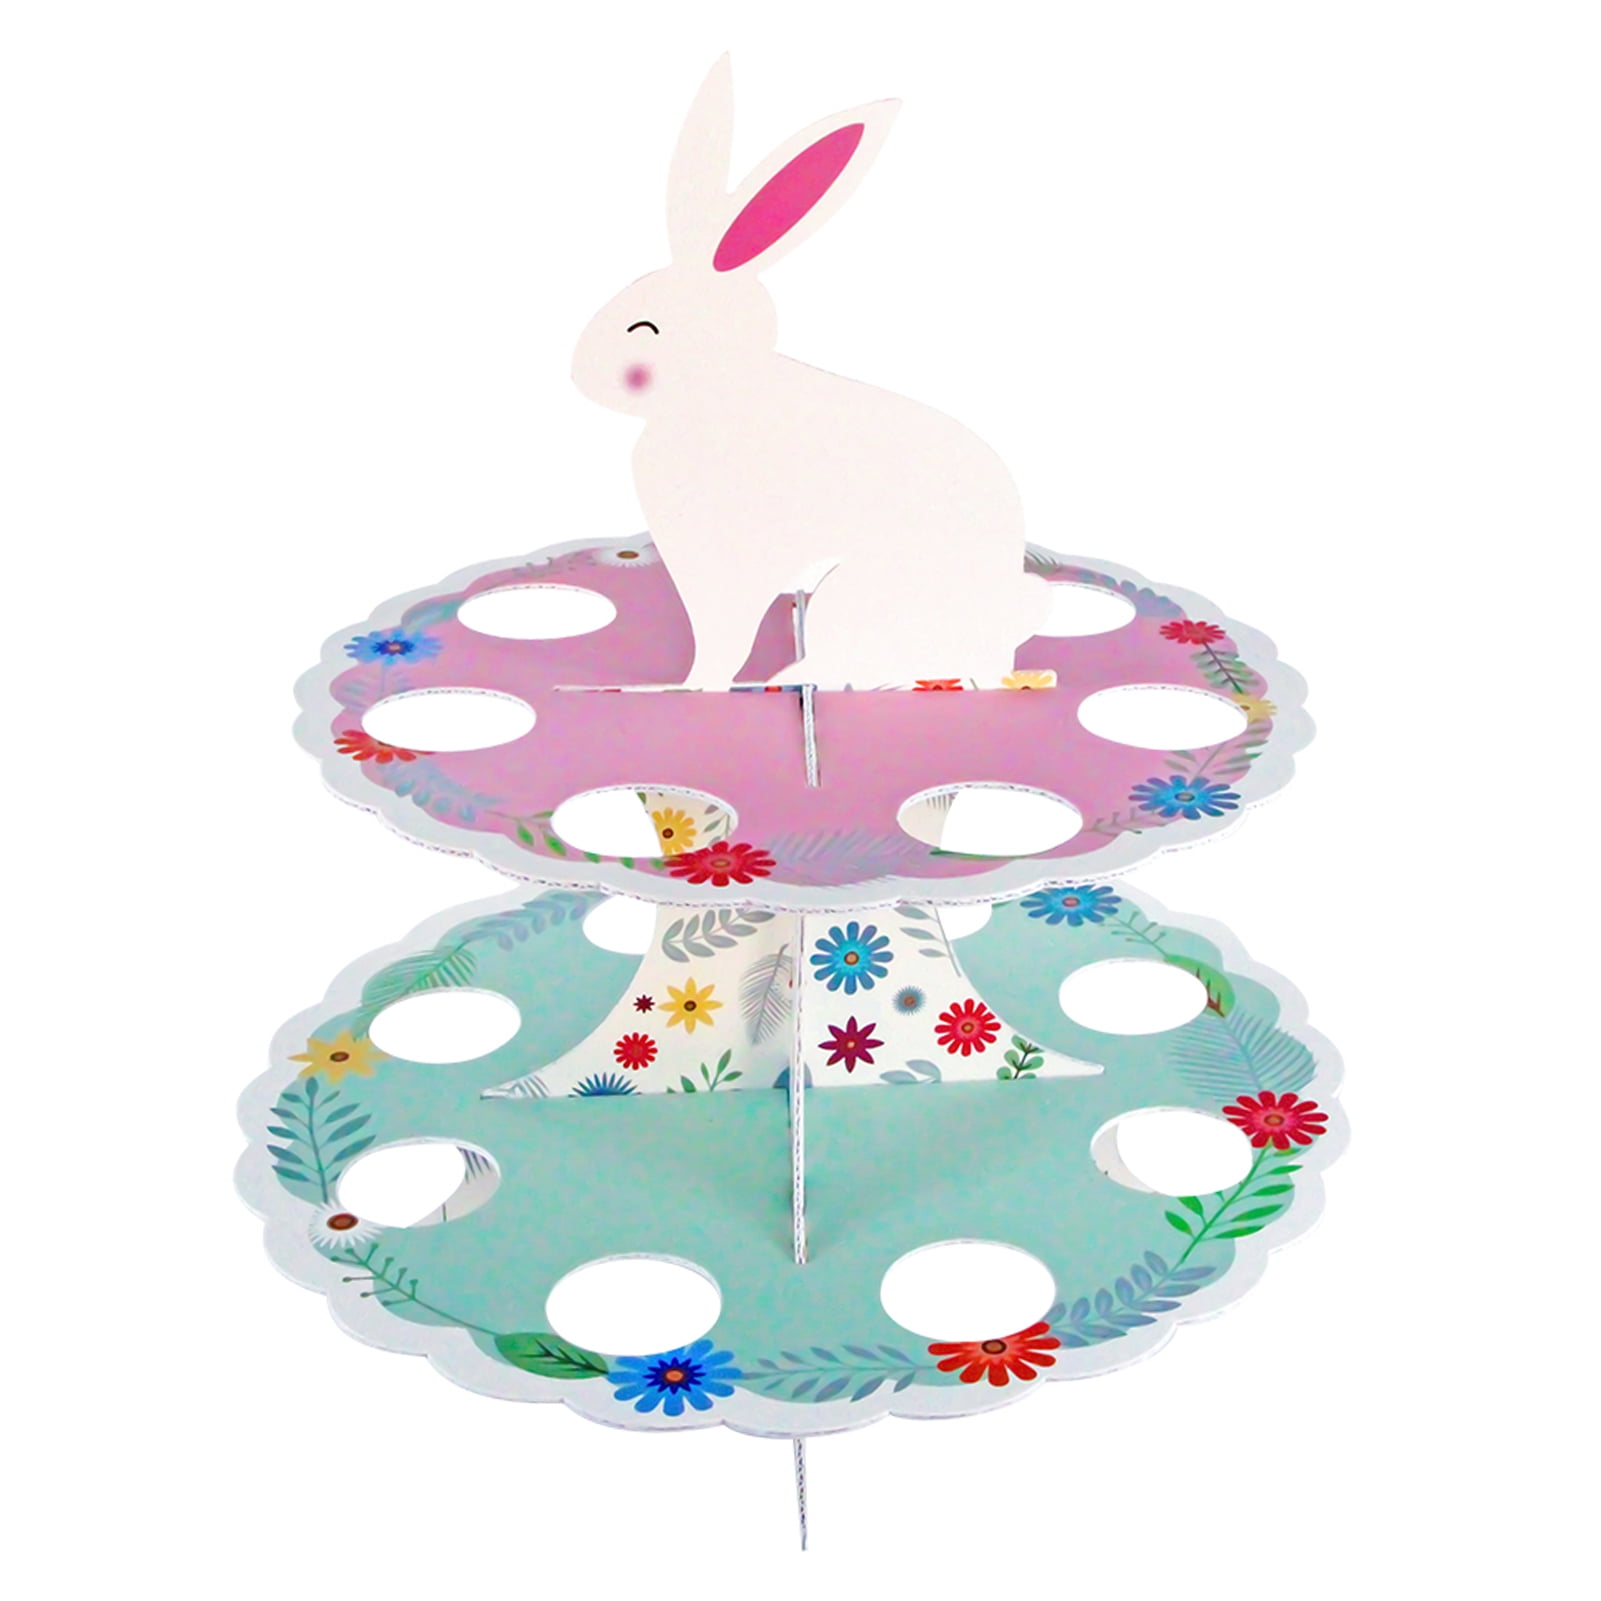 Cake Stand bunny rabbit wedding birthday party easter sweet treats candy cart 